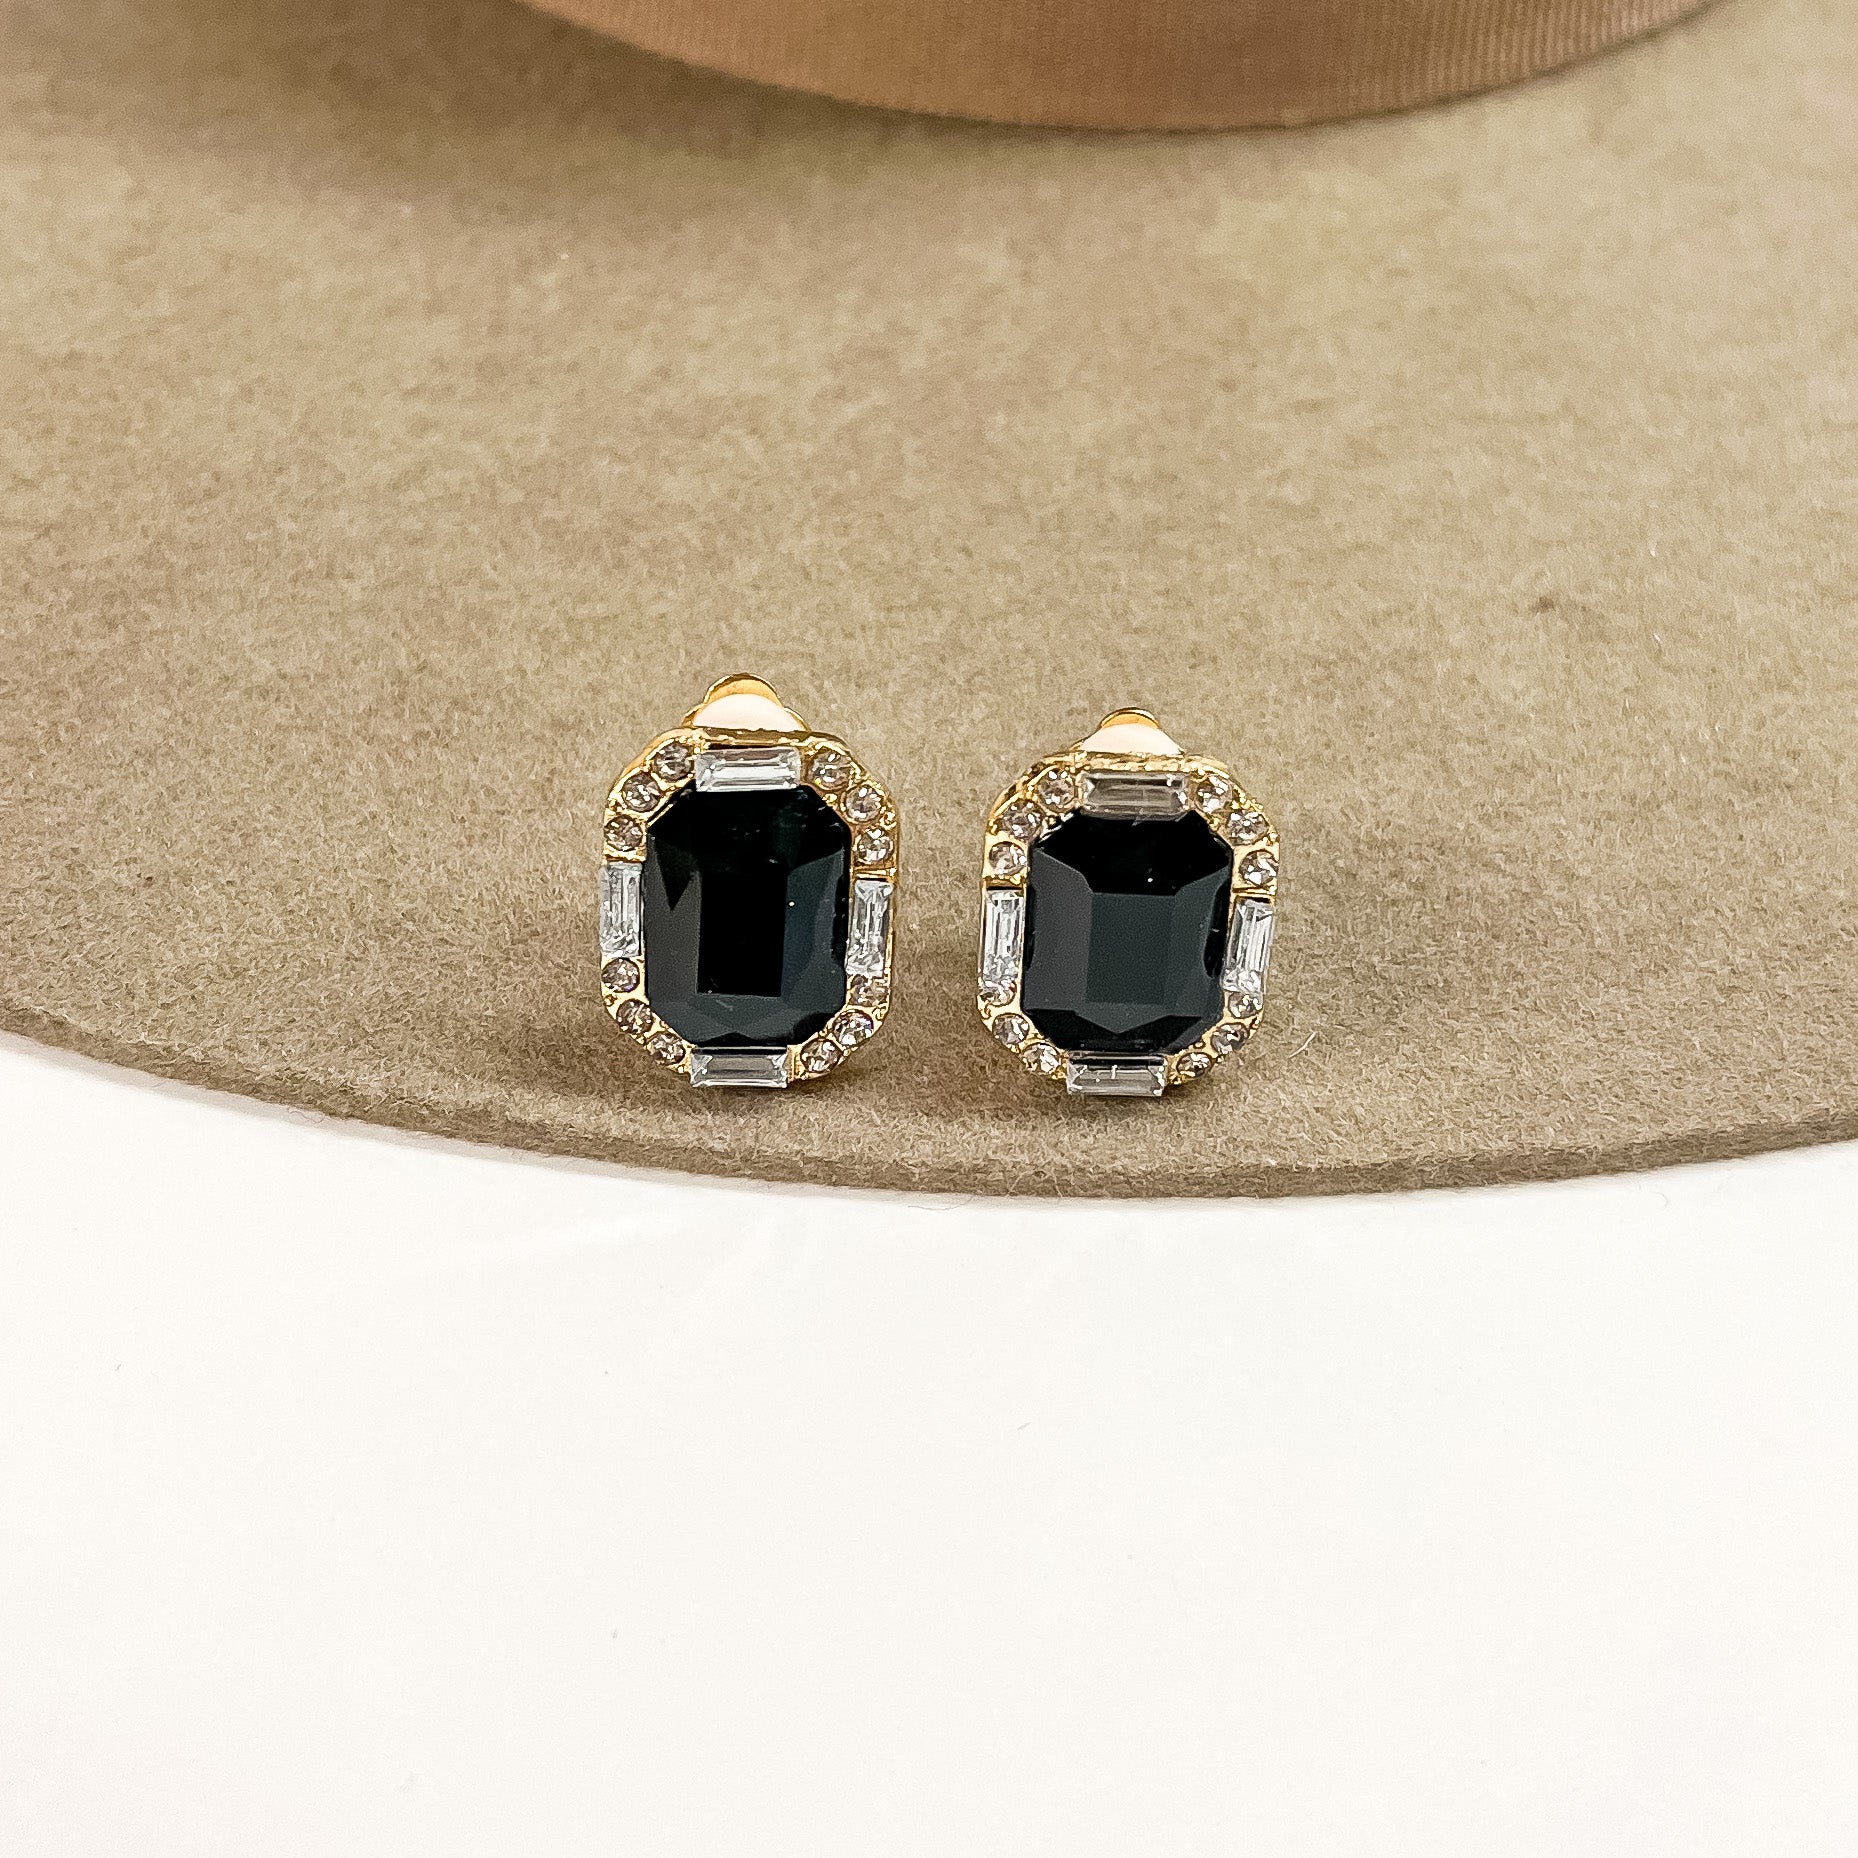 Buy 3 for $10 | Faux Crystal Stud Clip on Earrings with Small Crystal Detailing - Giddy Up Glamour Boutique